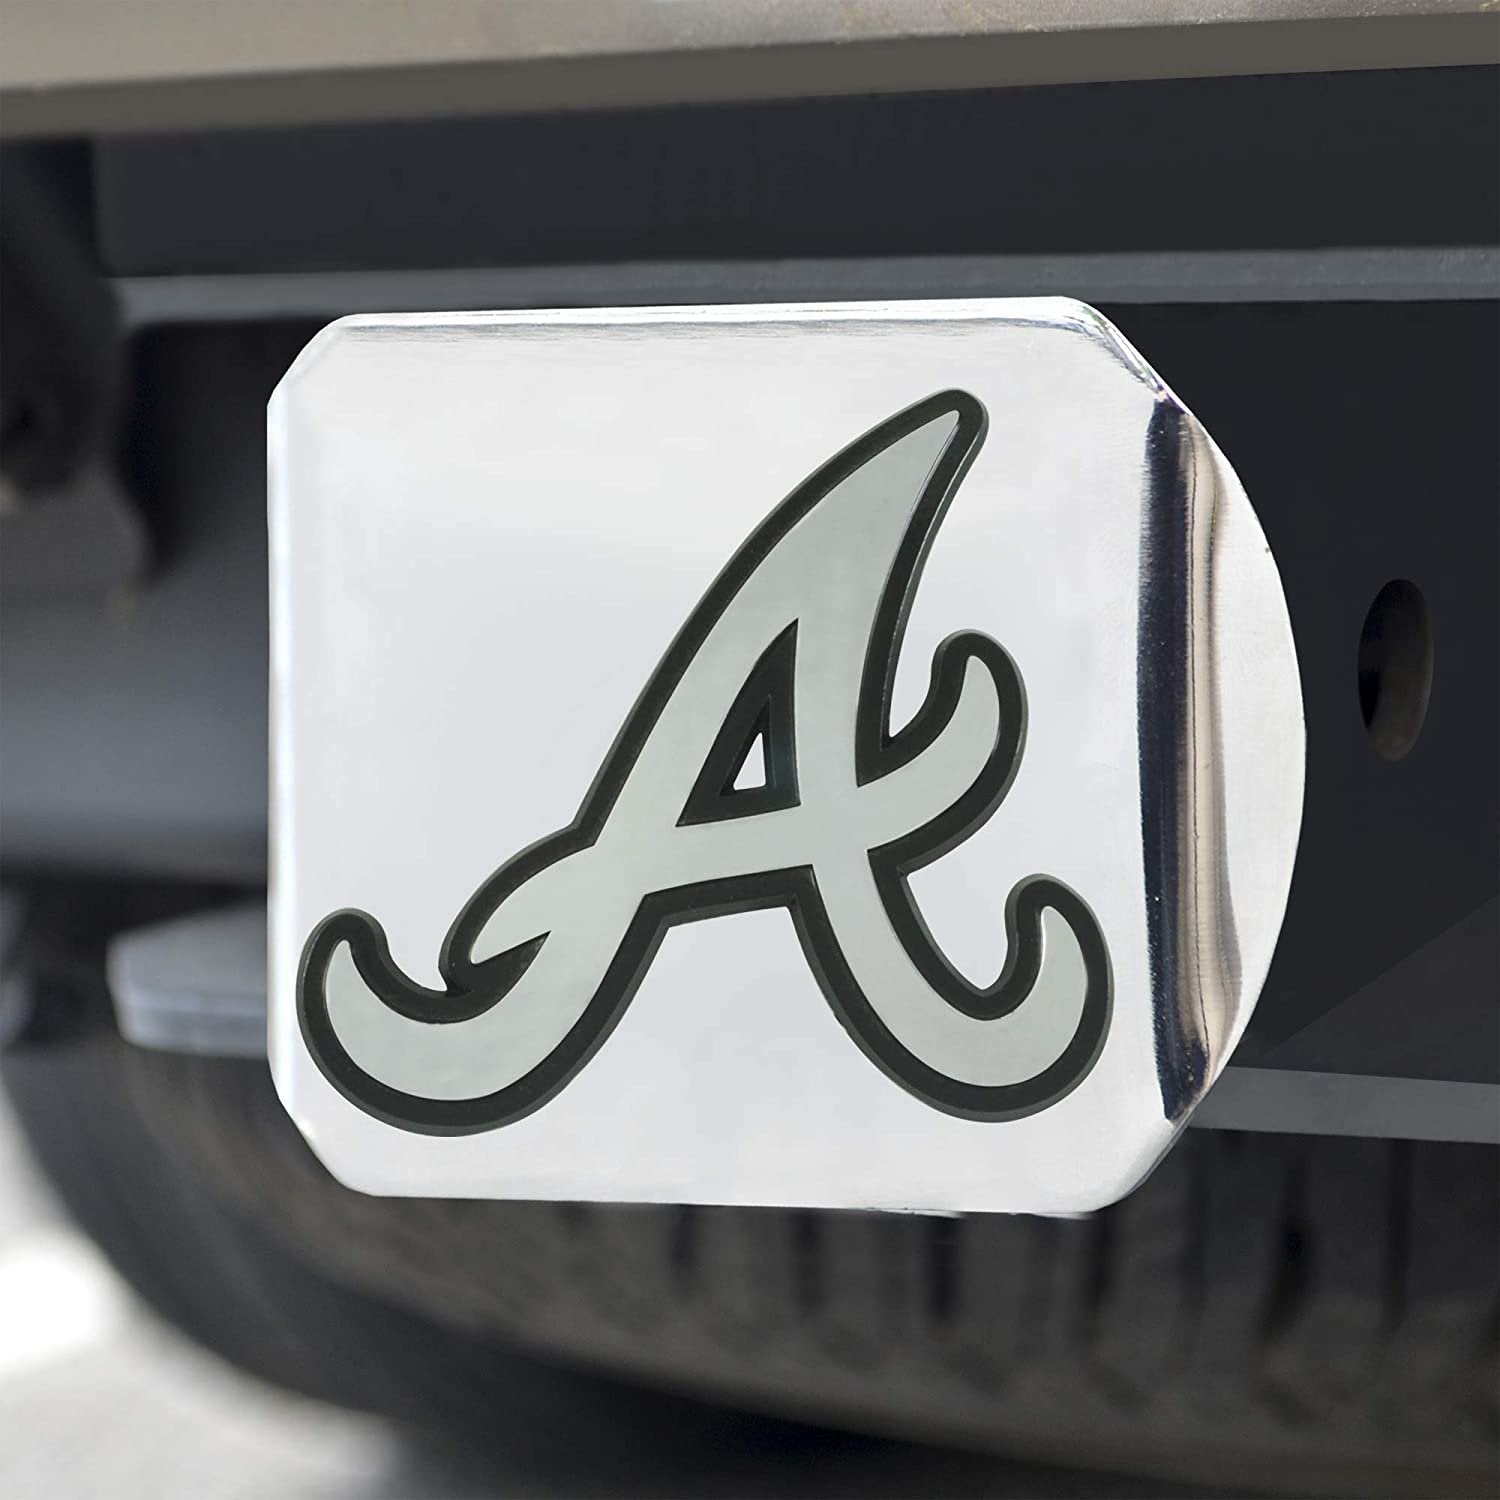 Atlanta Braves Hitch Cover Solid Metal with Raised Chrome Metal Emblem 2" Square Type III